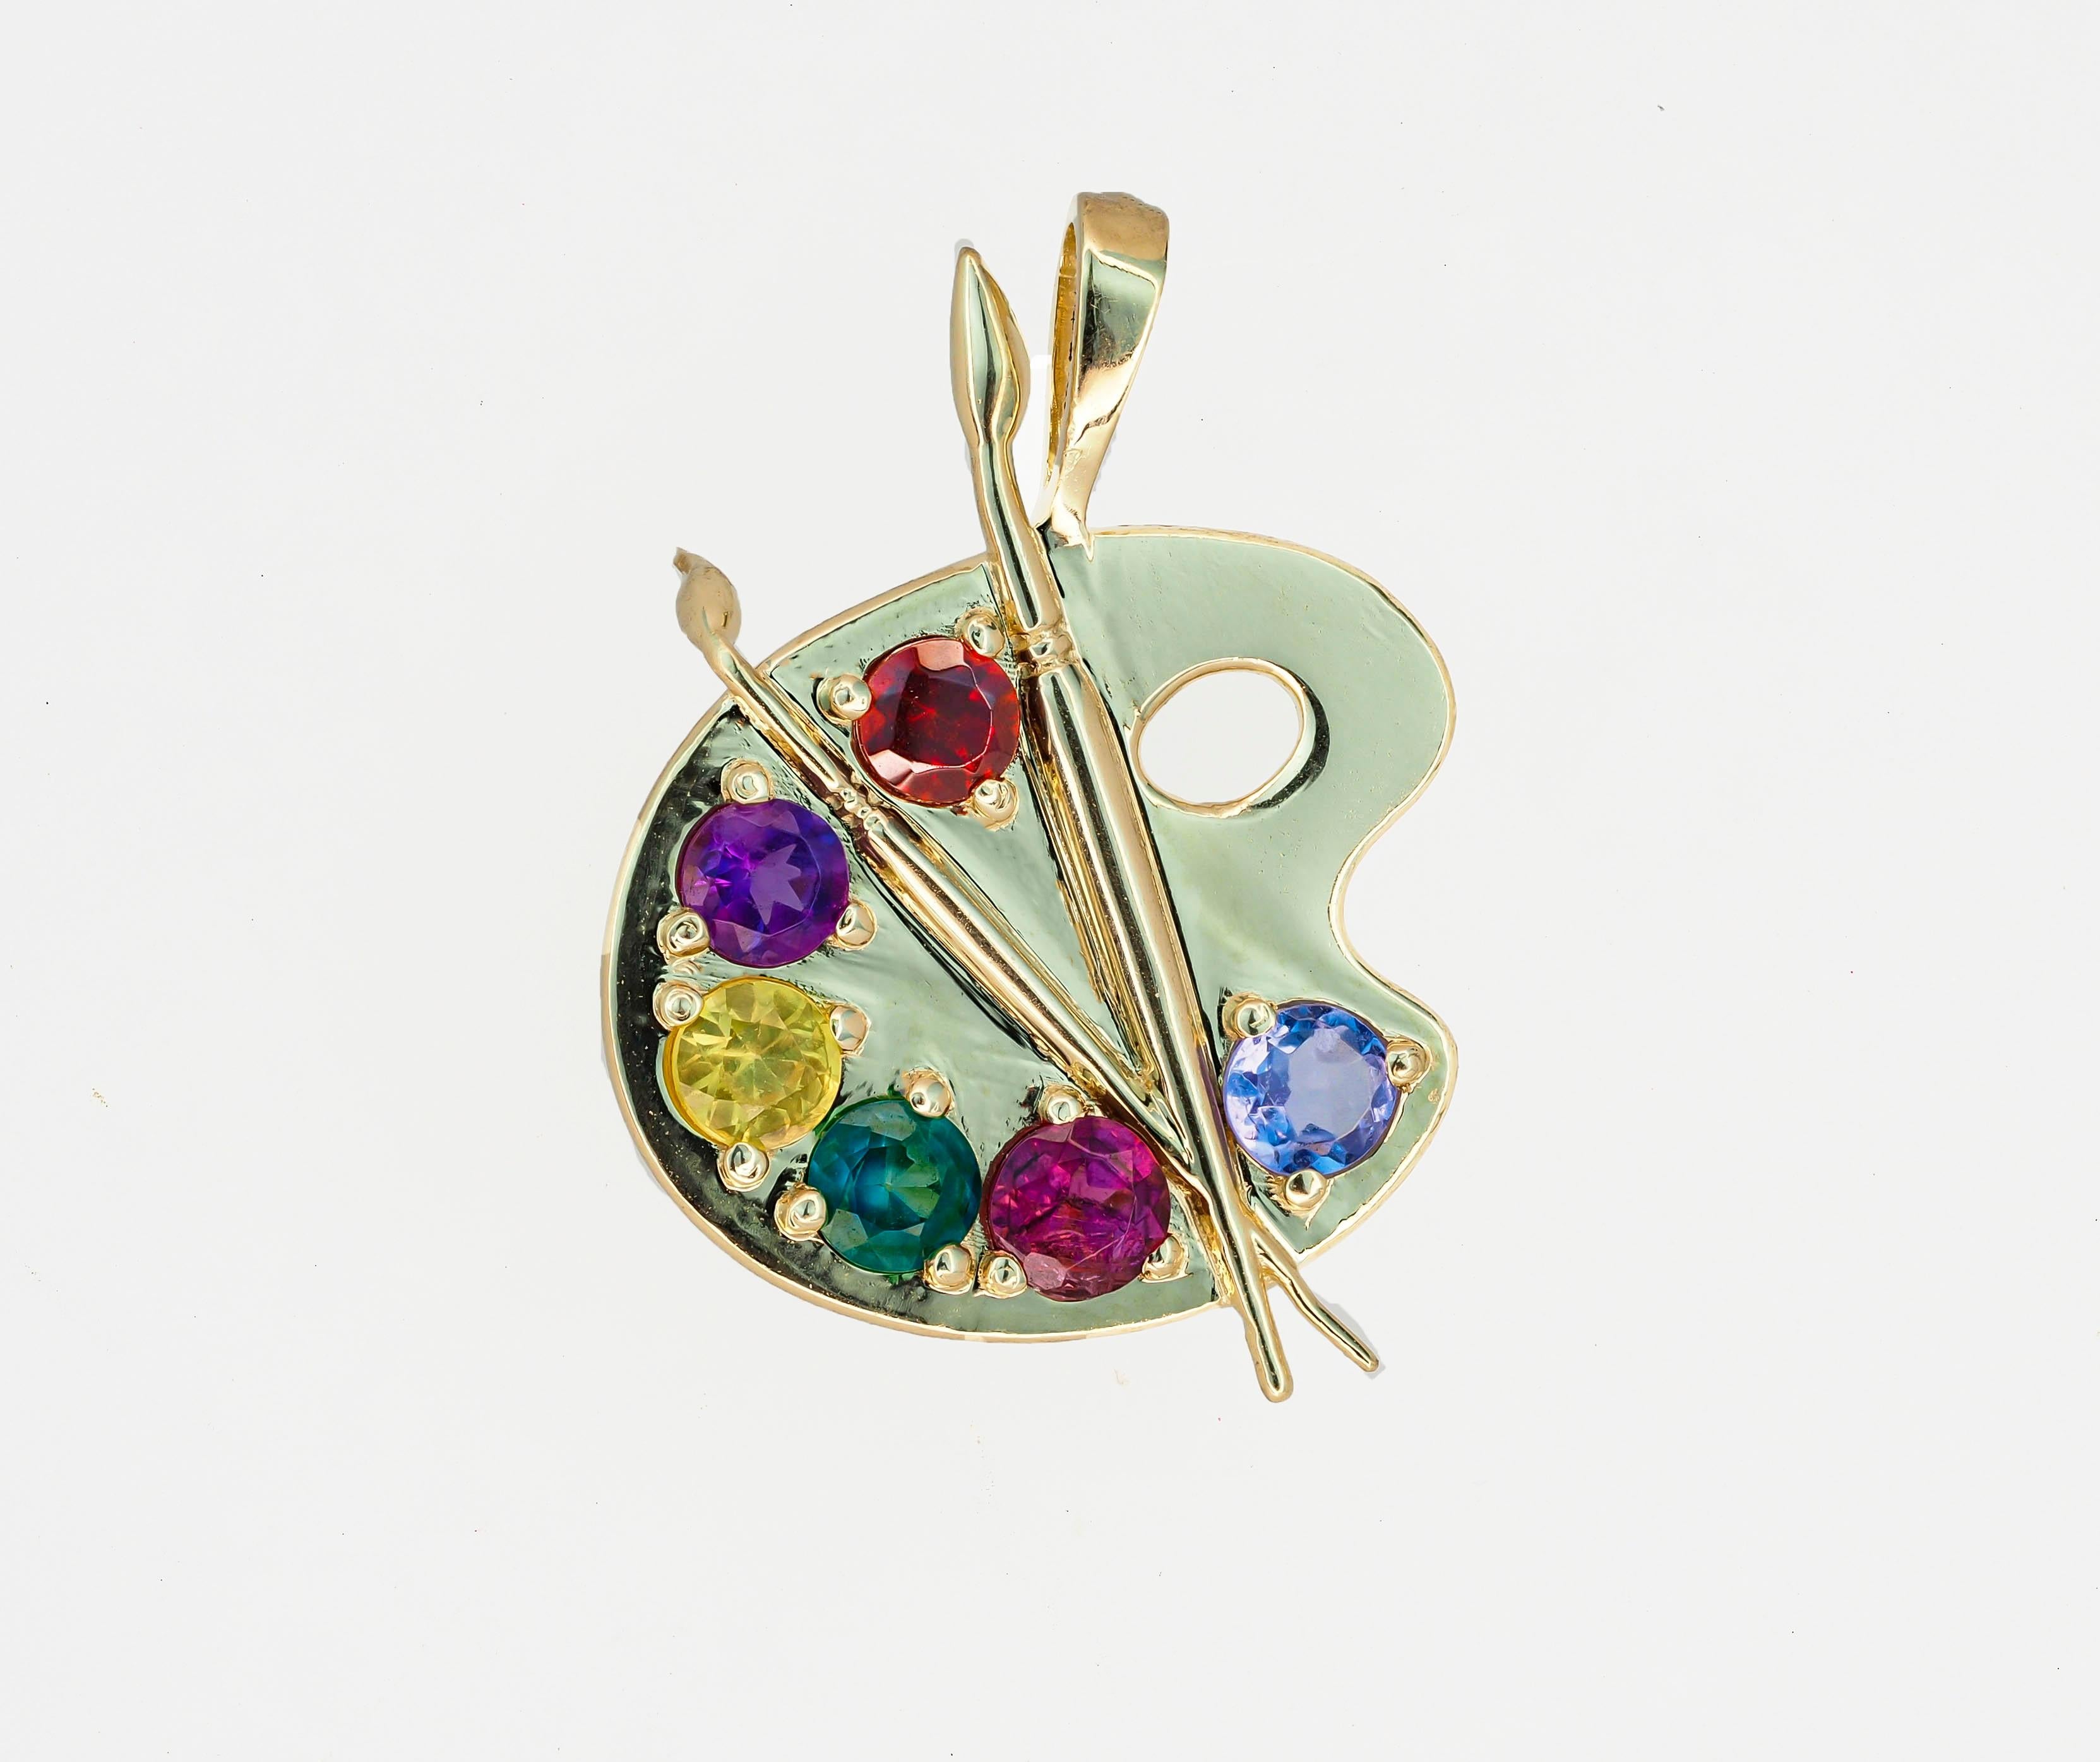 Palette with Paints 14k Gold Pendant with Colored Stones For Sale 1